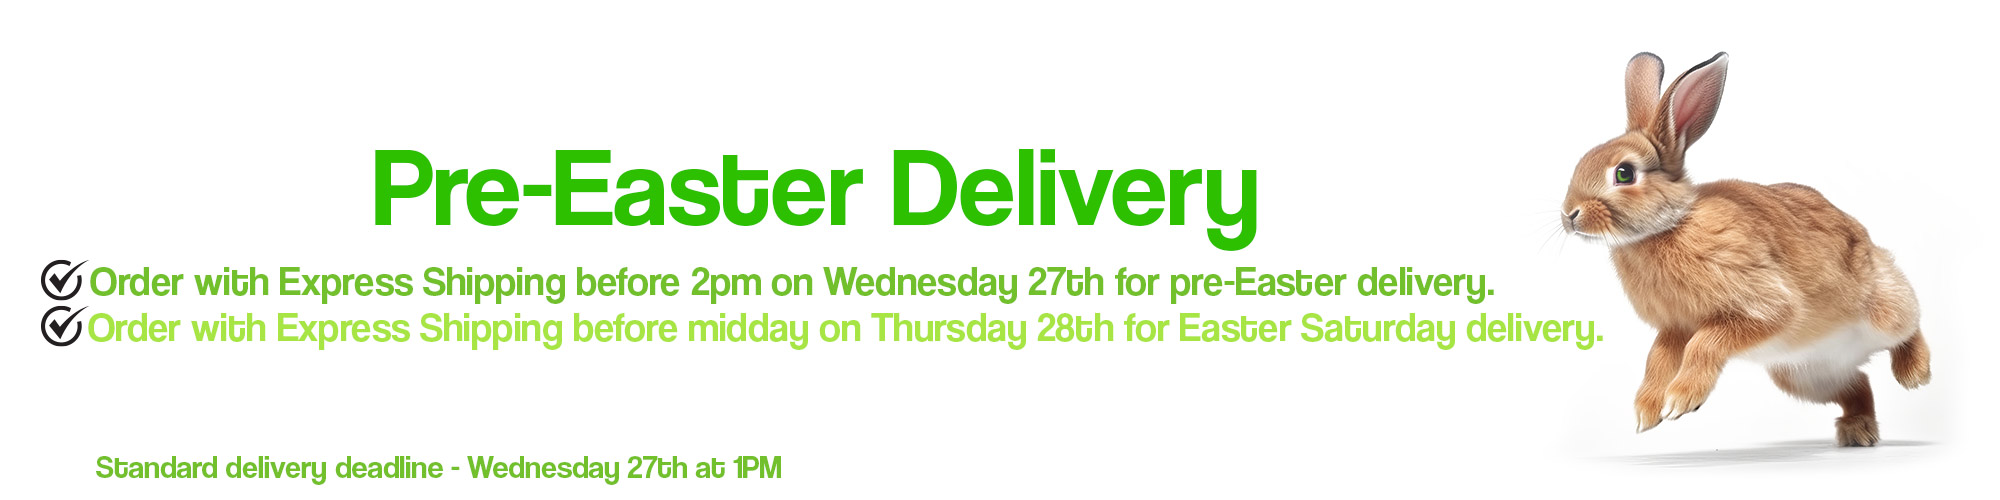 Delivery in time for Easter at E-Bikes Direct Outlet